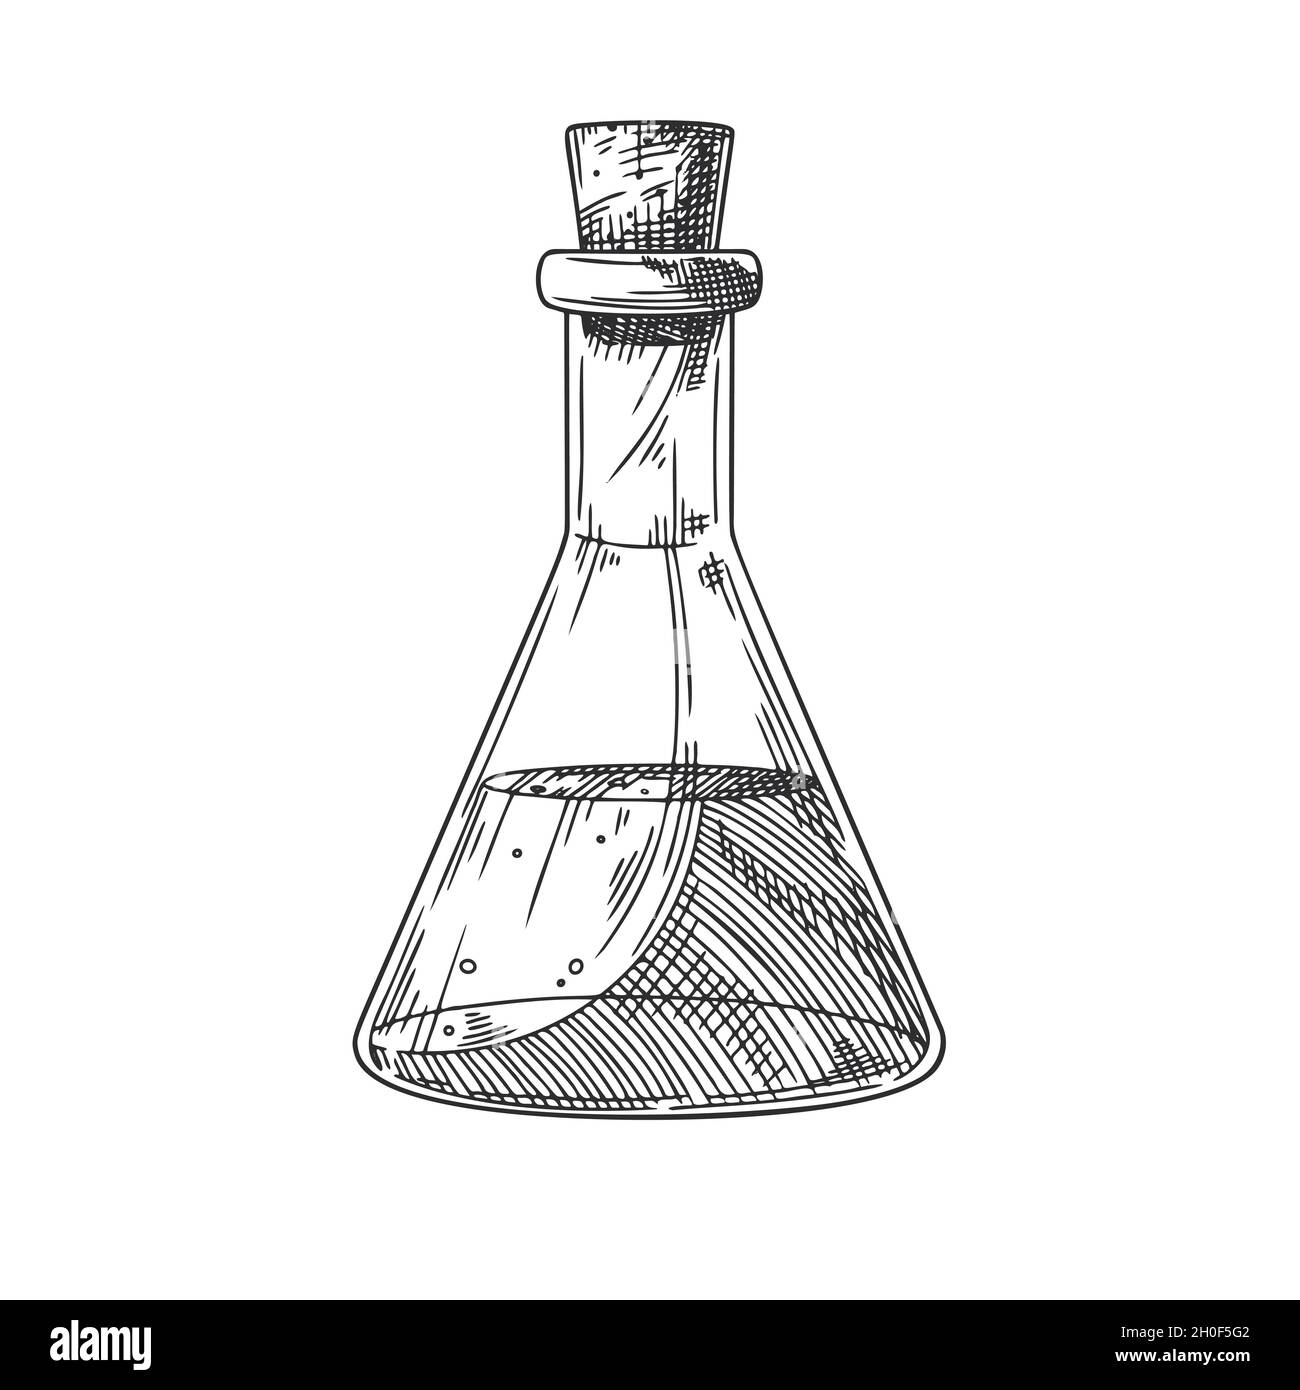 SVG - Drawing Conical Flask - YouTube